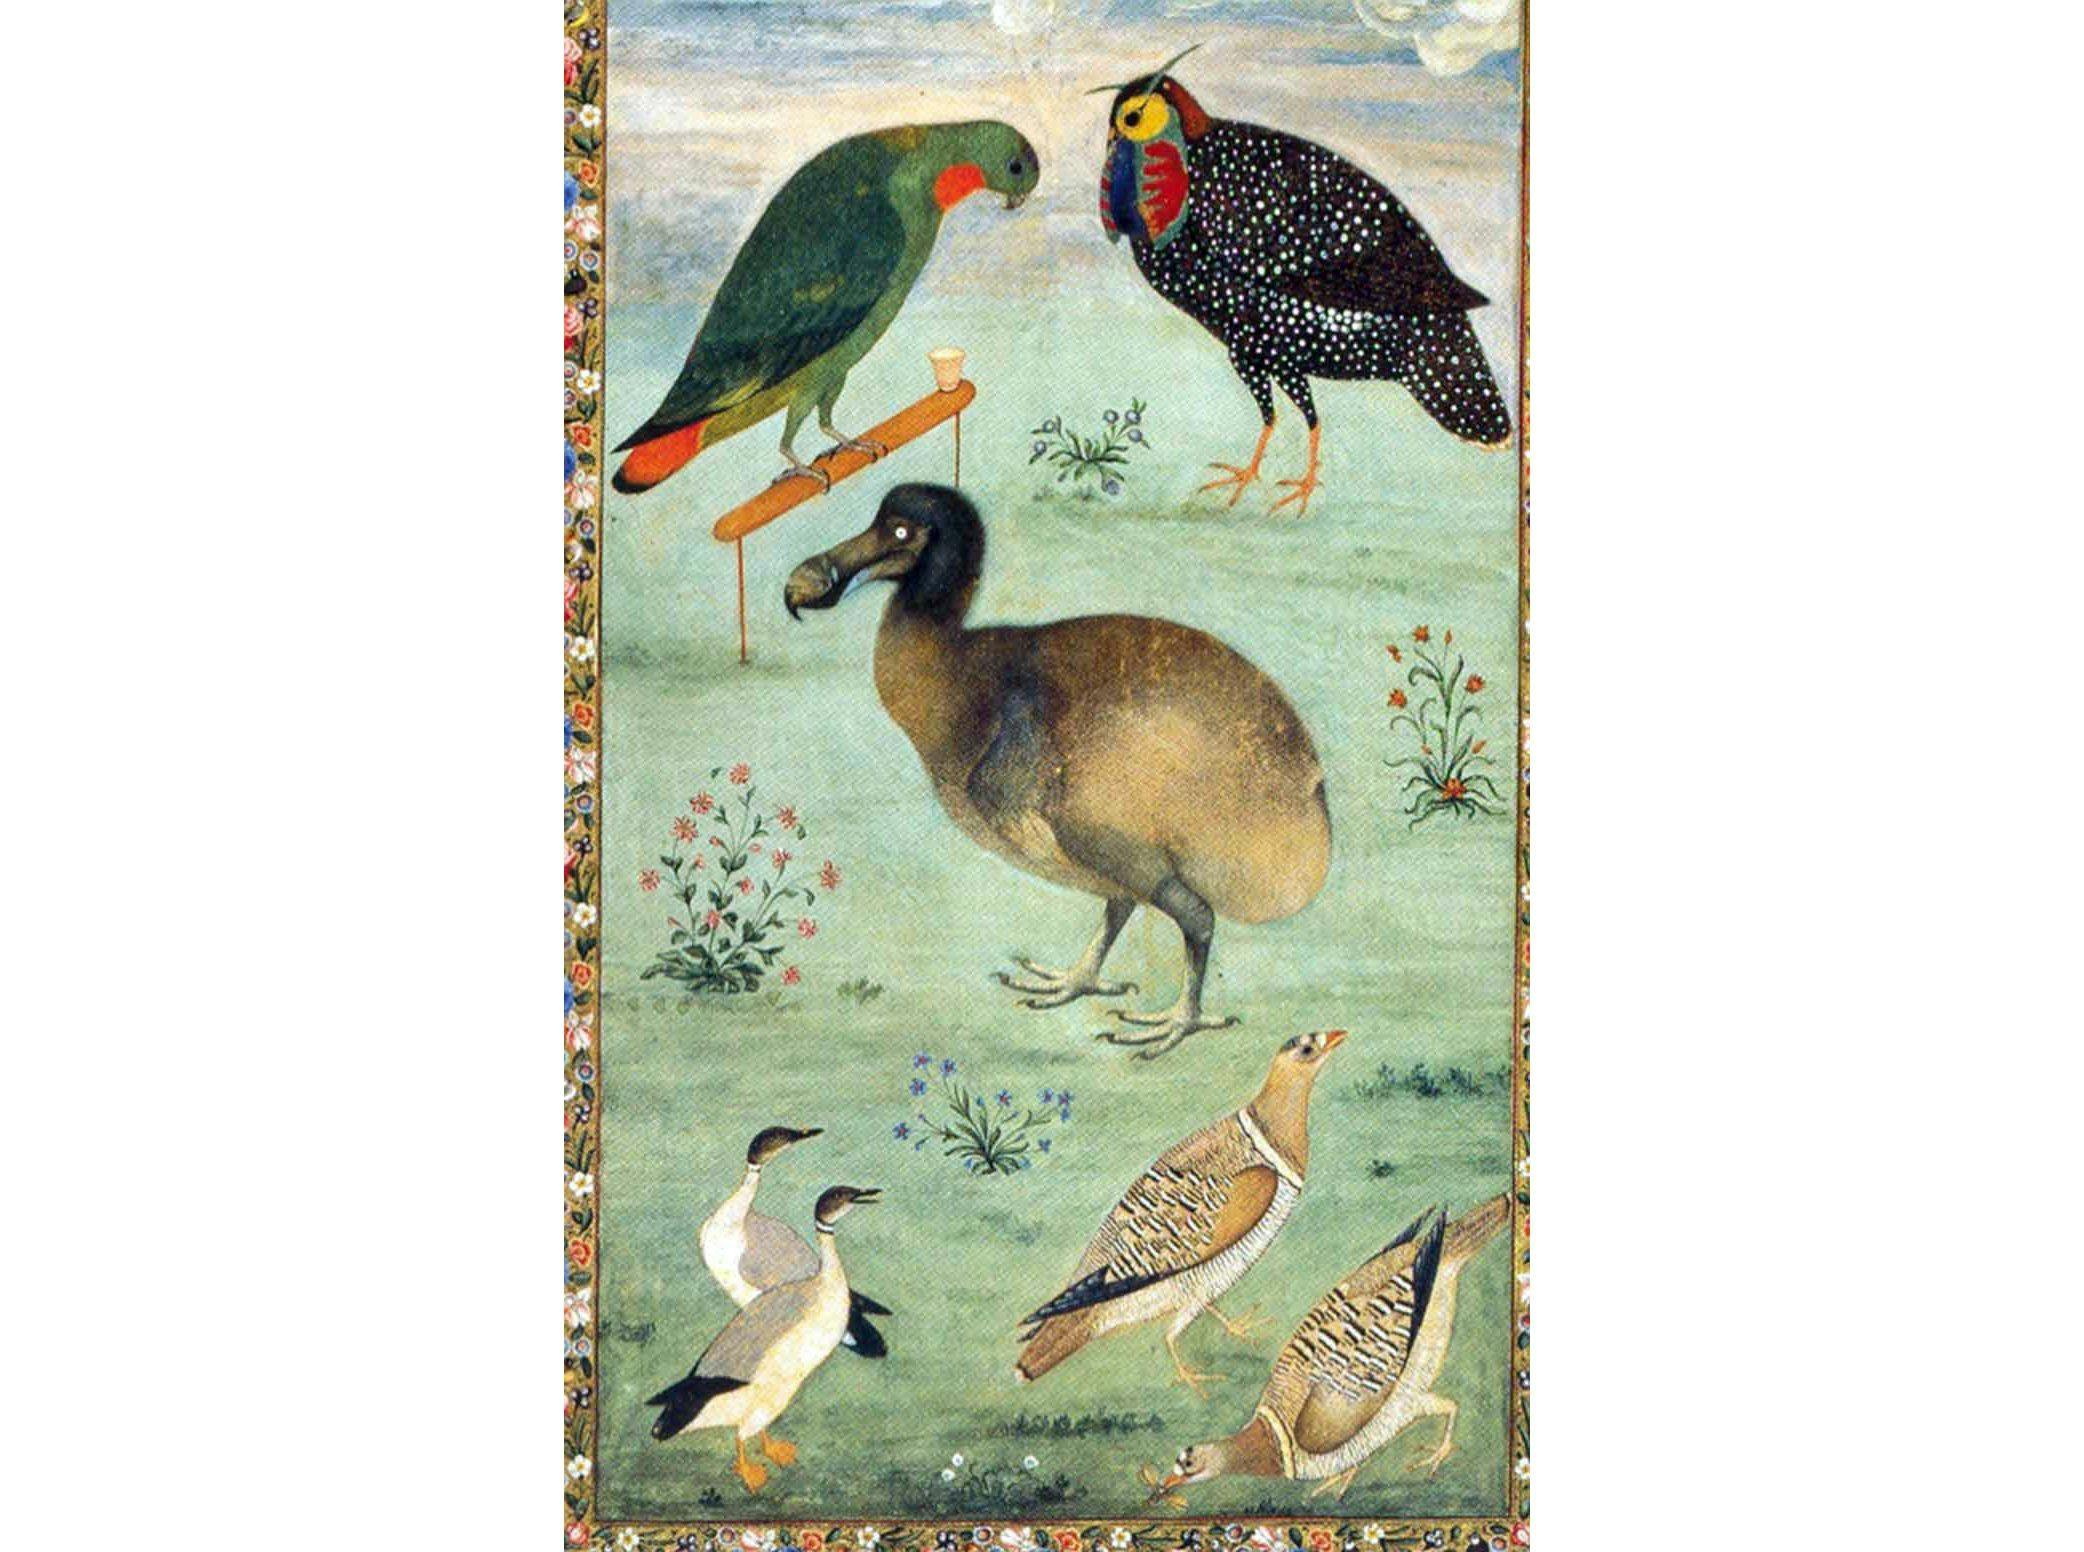 An illustration of the dodo with other birds by Mansoor